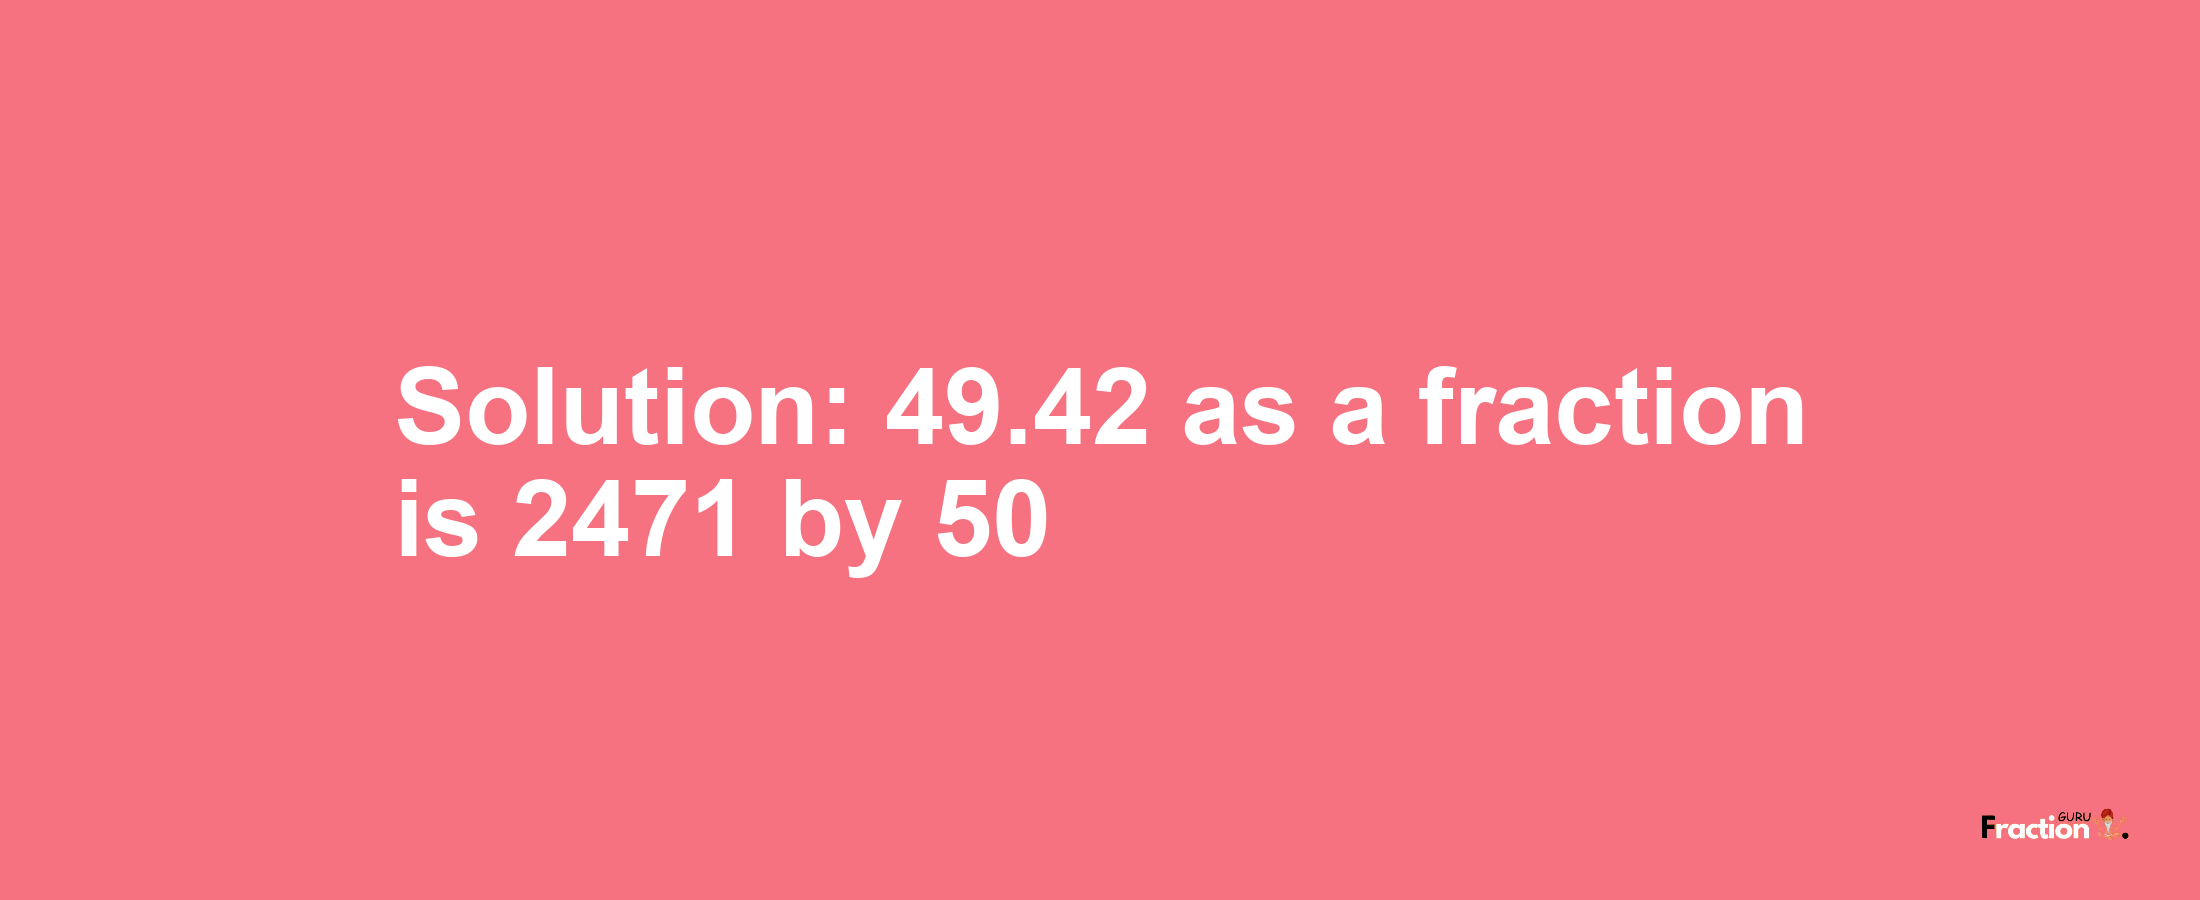 Solution:49.42 as a fraction is 2471/50